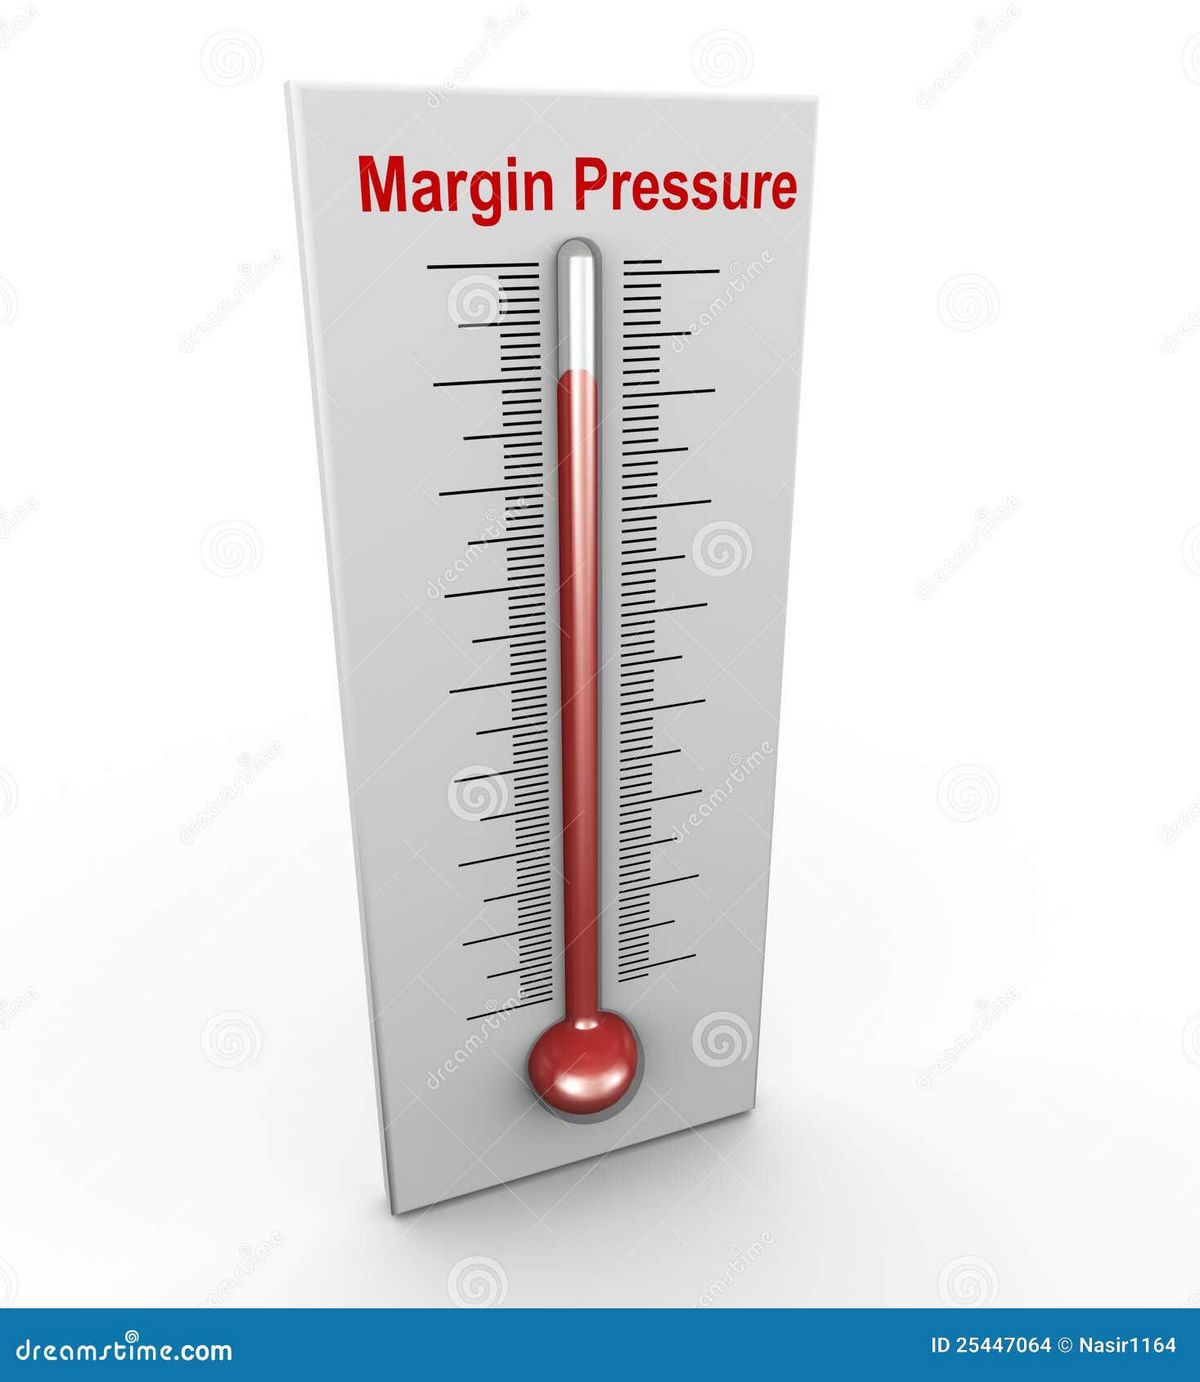 Margin Pressure What it Means How it Works